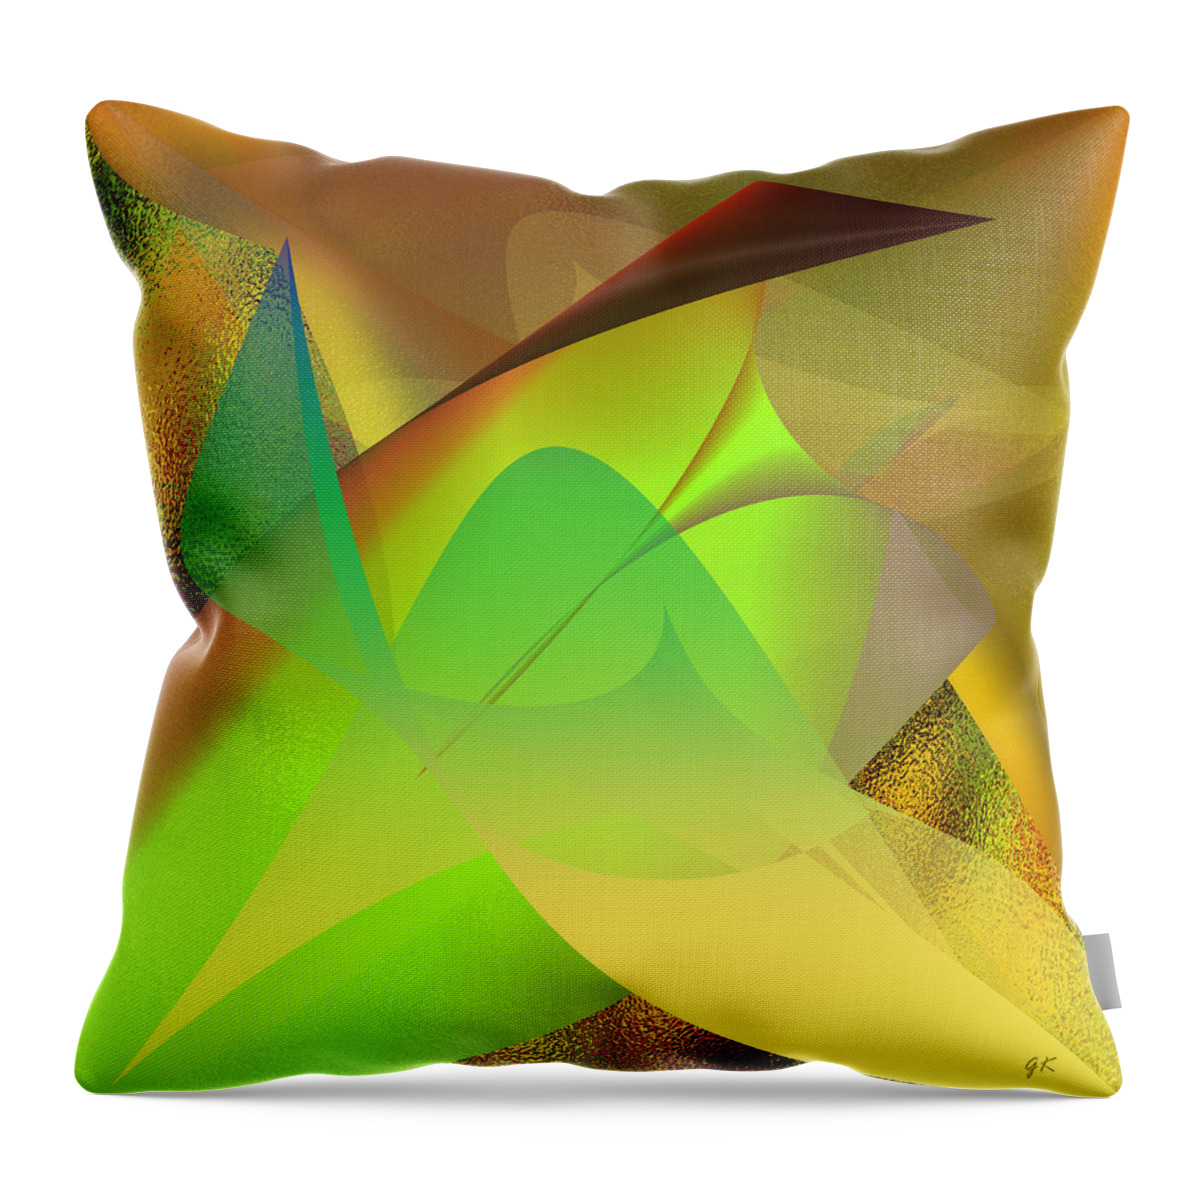 Abstract Throw Pillow featuring the digital art Dreams - Abstract by Gerlinde Keating